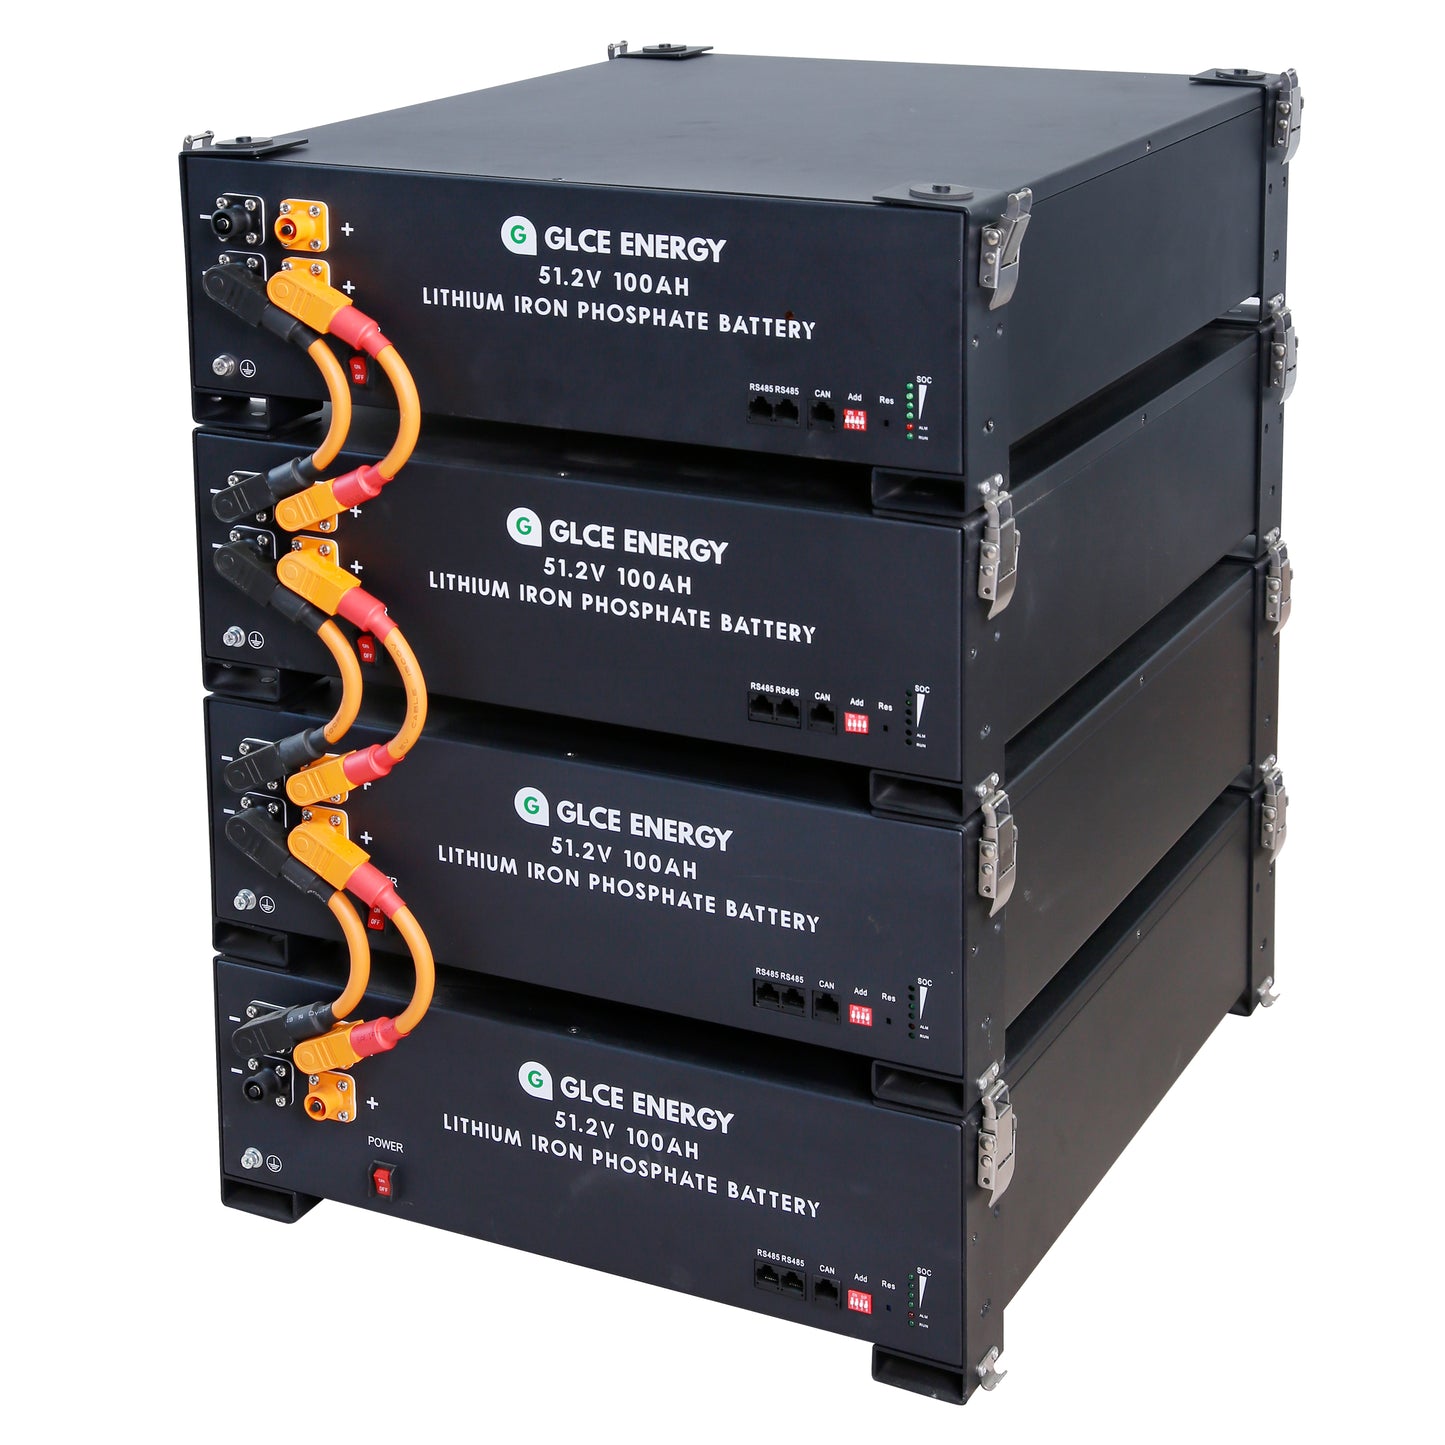 GLCE ENERGY 20KW Stacked Battery Pack